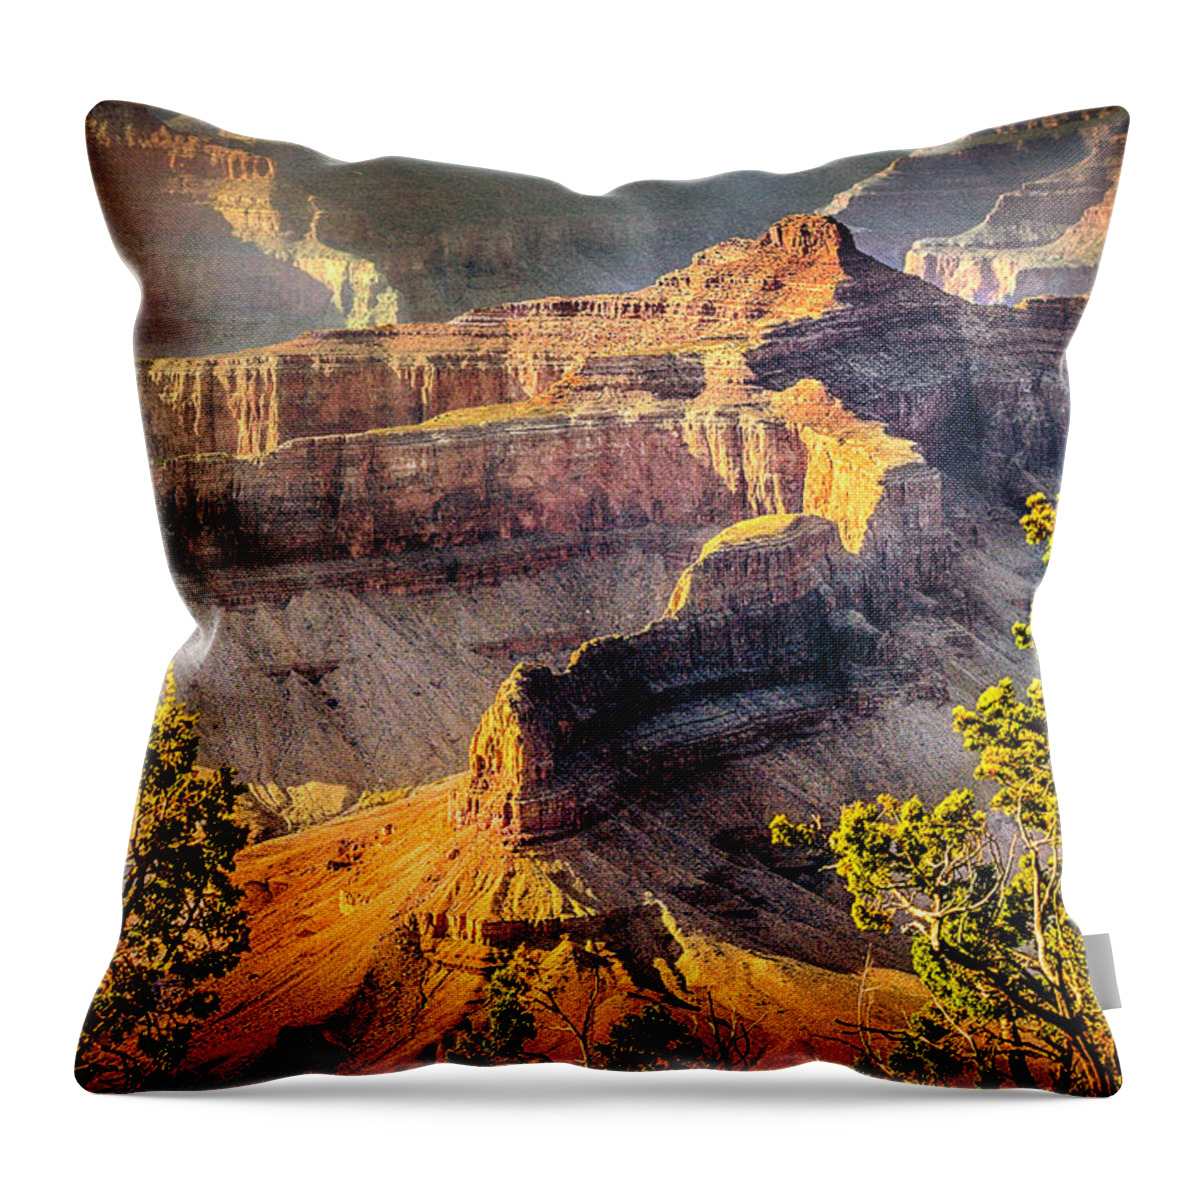 Arizona Throw Pillow featuring the photograph Grand Canyon National Park by Bob and Nadine Johnston